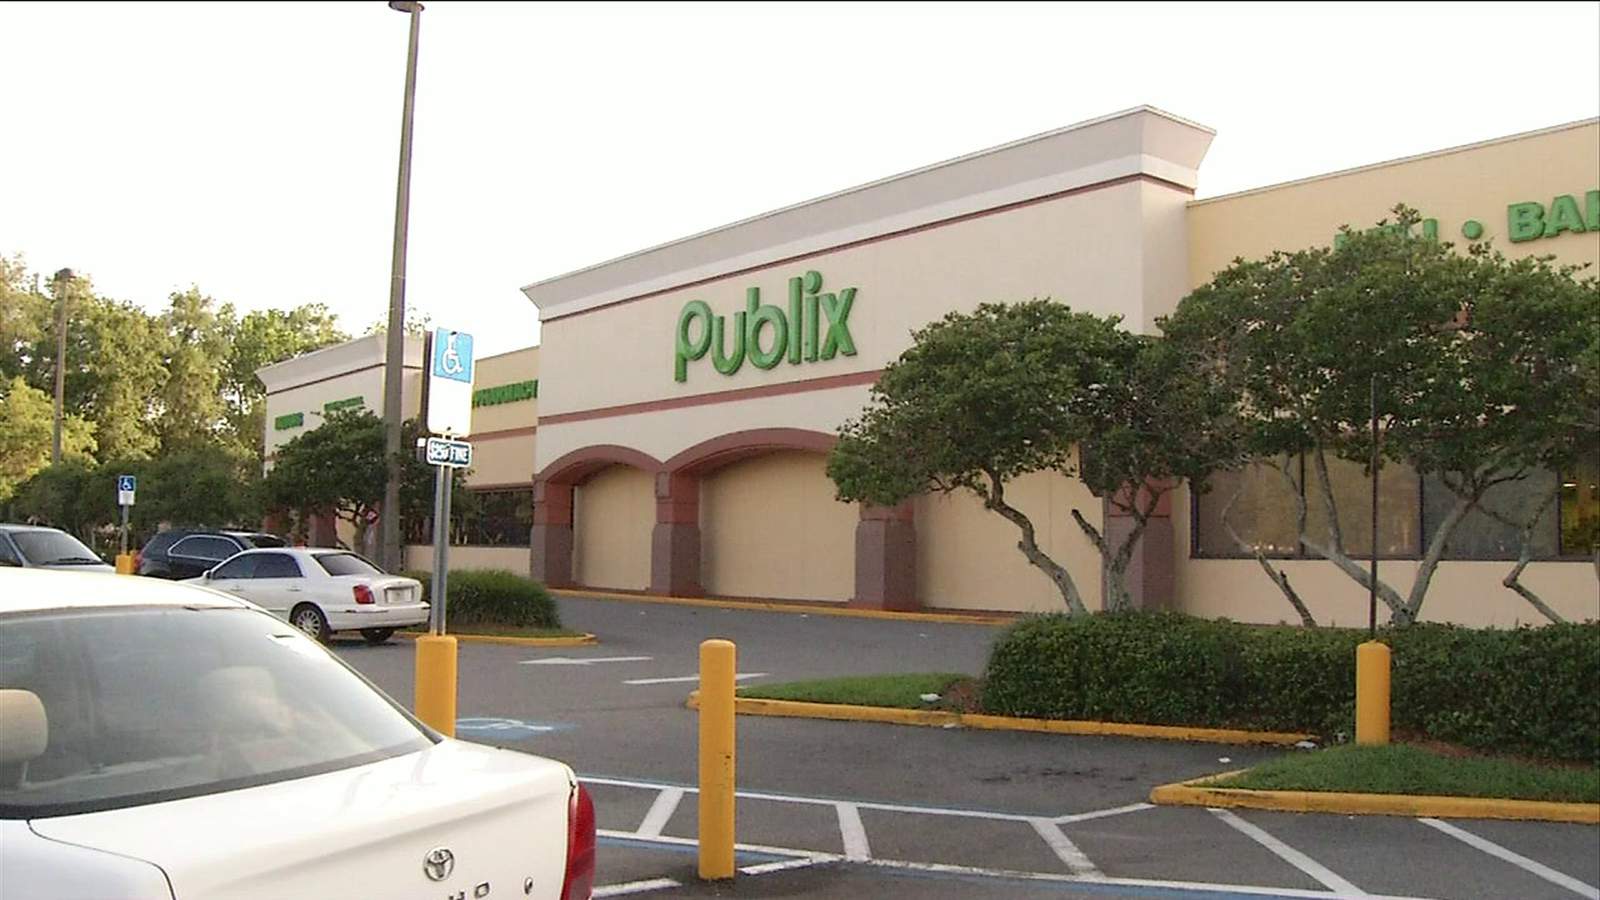 Employees at 4 more Brevard Publix locations test positive for COVID-19